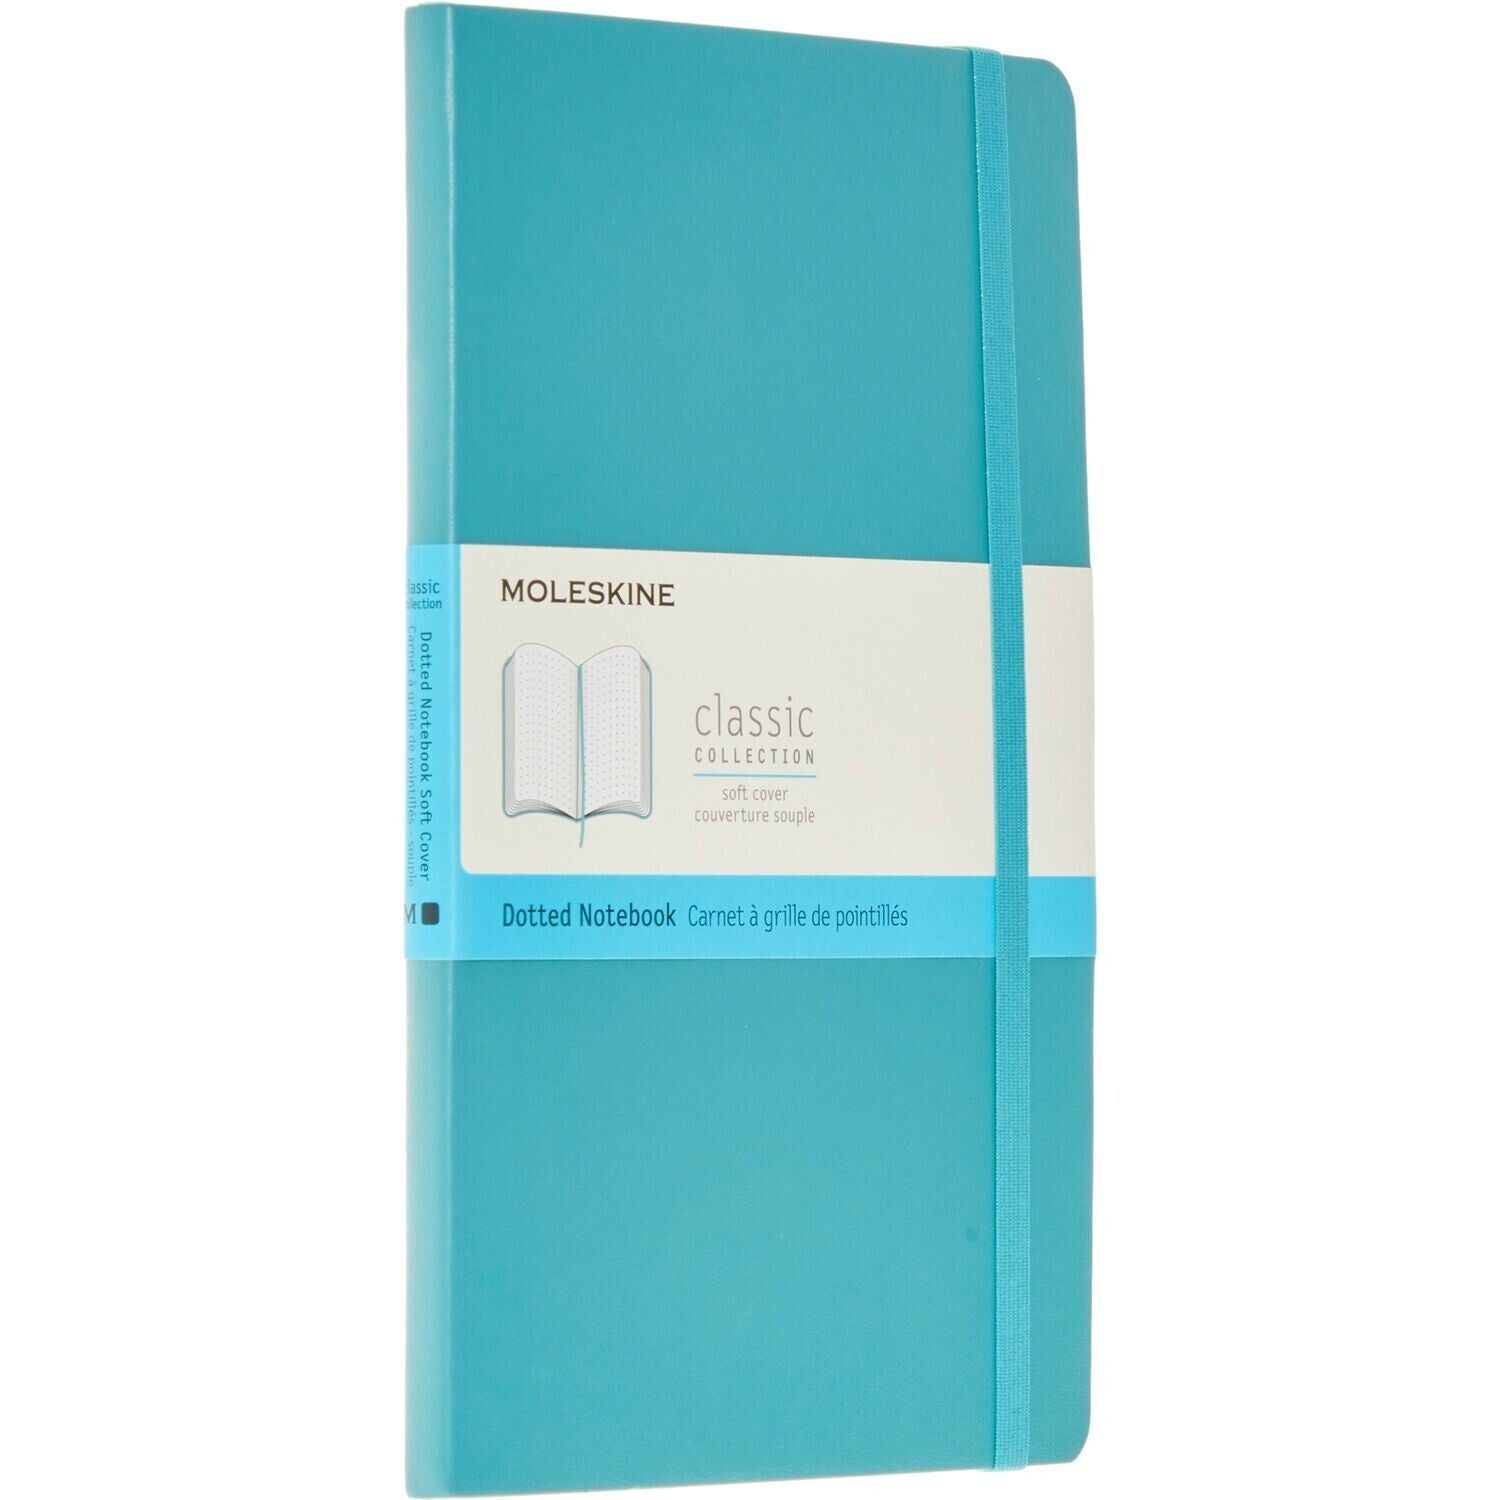 MOLESKINE - Soft Cover Dotted Notebook (Teal), 192 pages,  13cm x 21cm